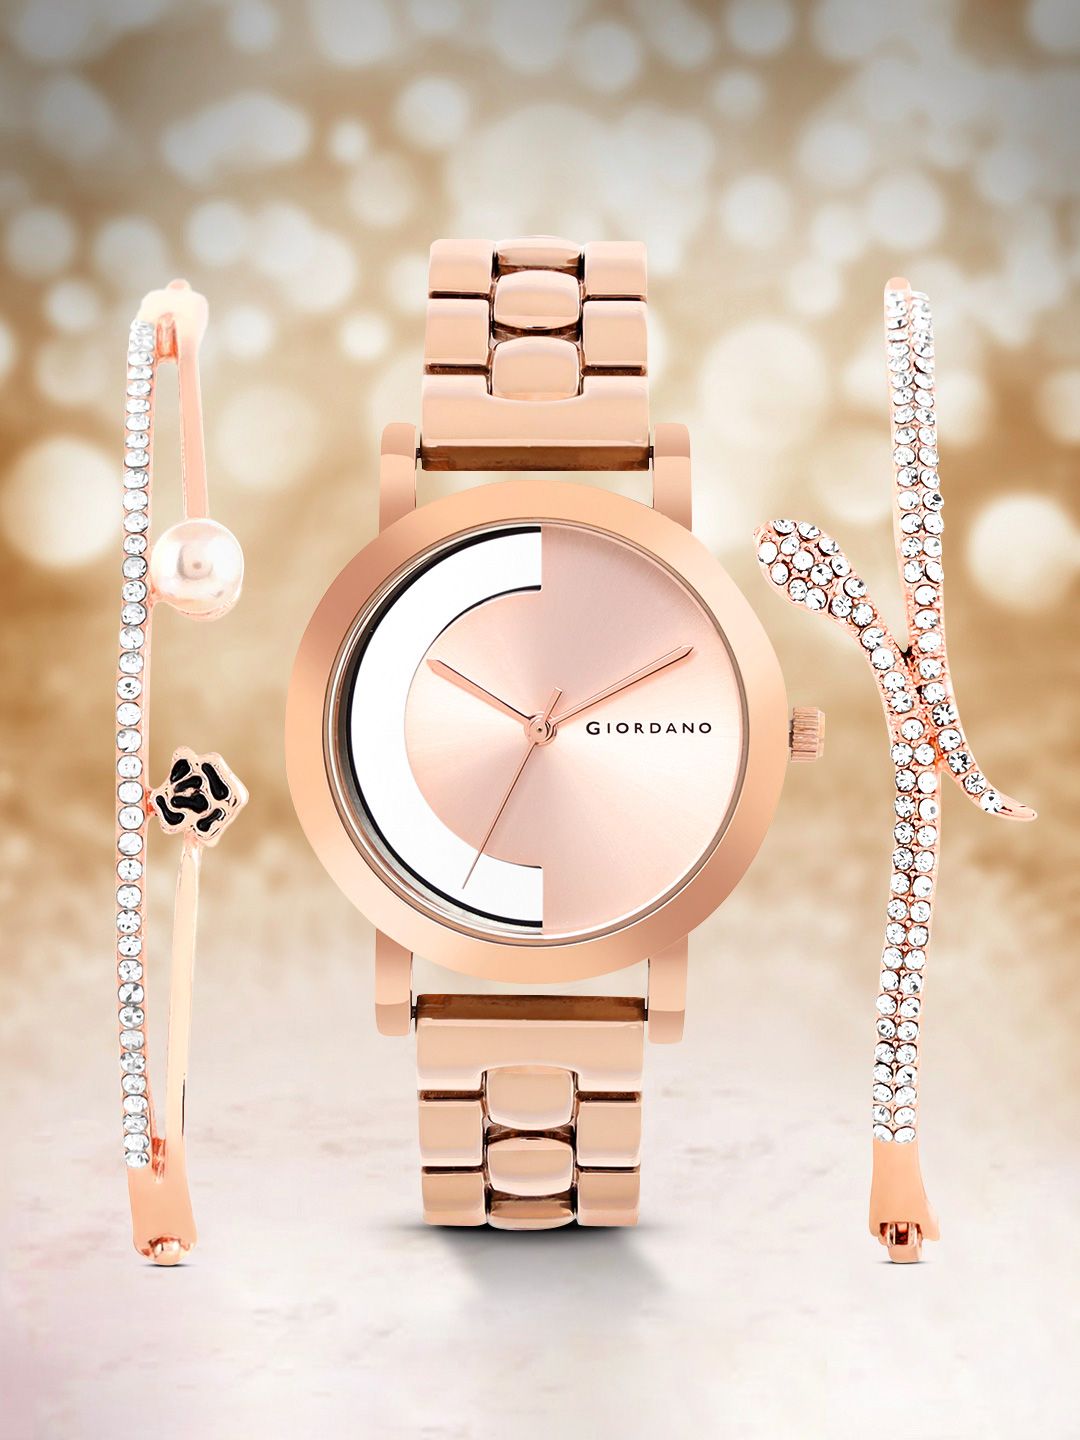 GIORDANO Women Peach-coloured Dial & Rose Gold Toned Analogue Watch C2173-11 Price in India